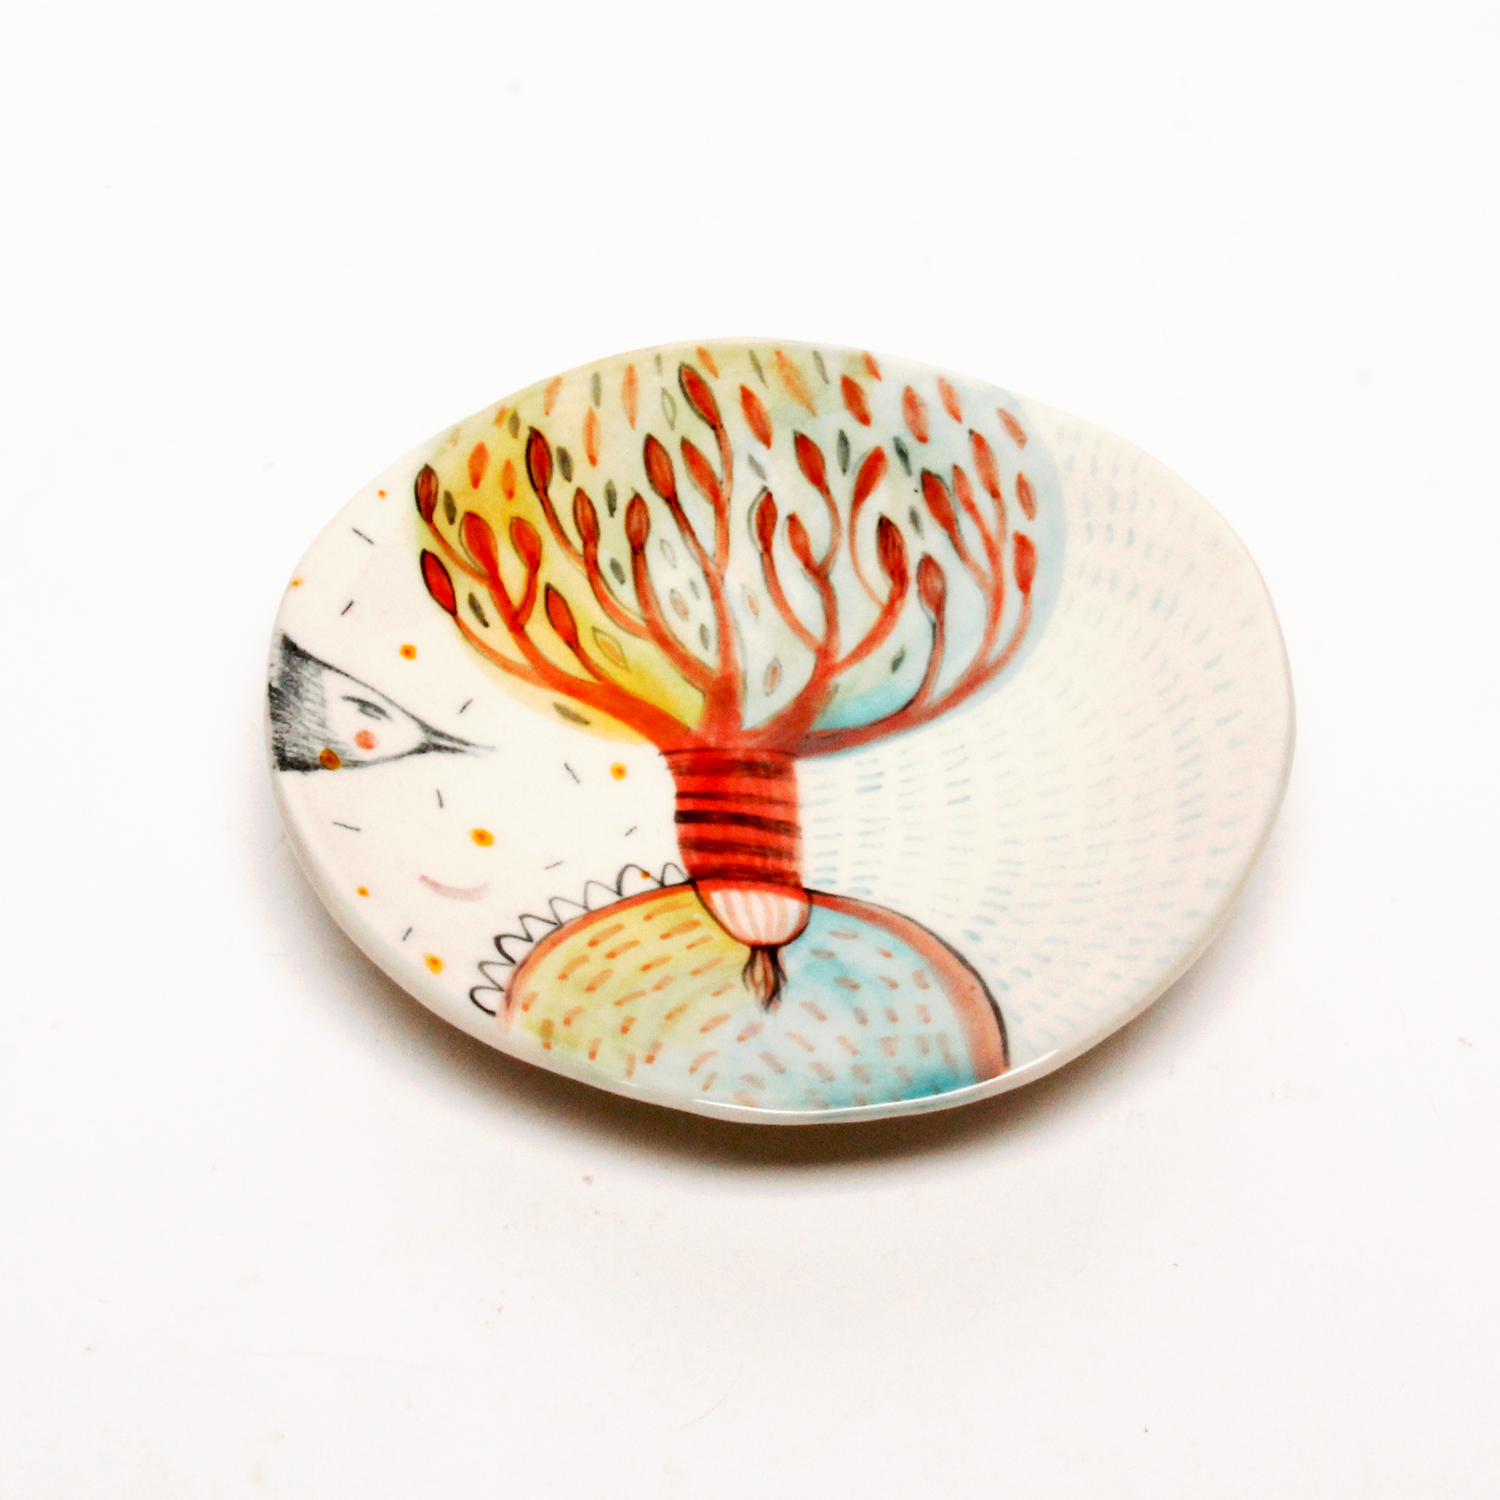 Maria Moldovan: Plate With Tree Product Image 2 of 4